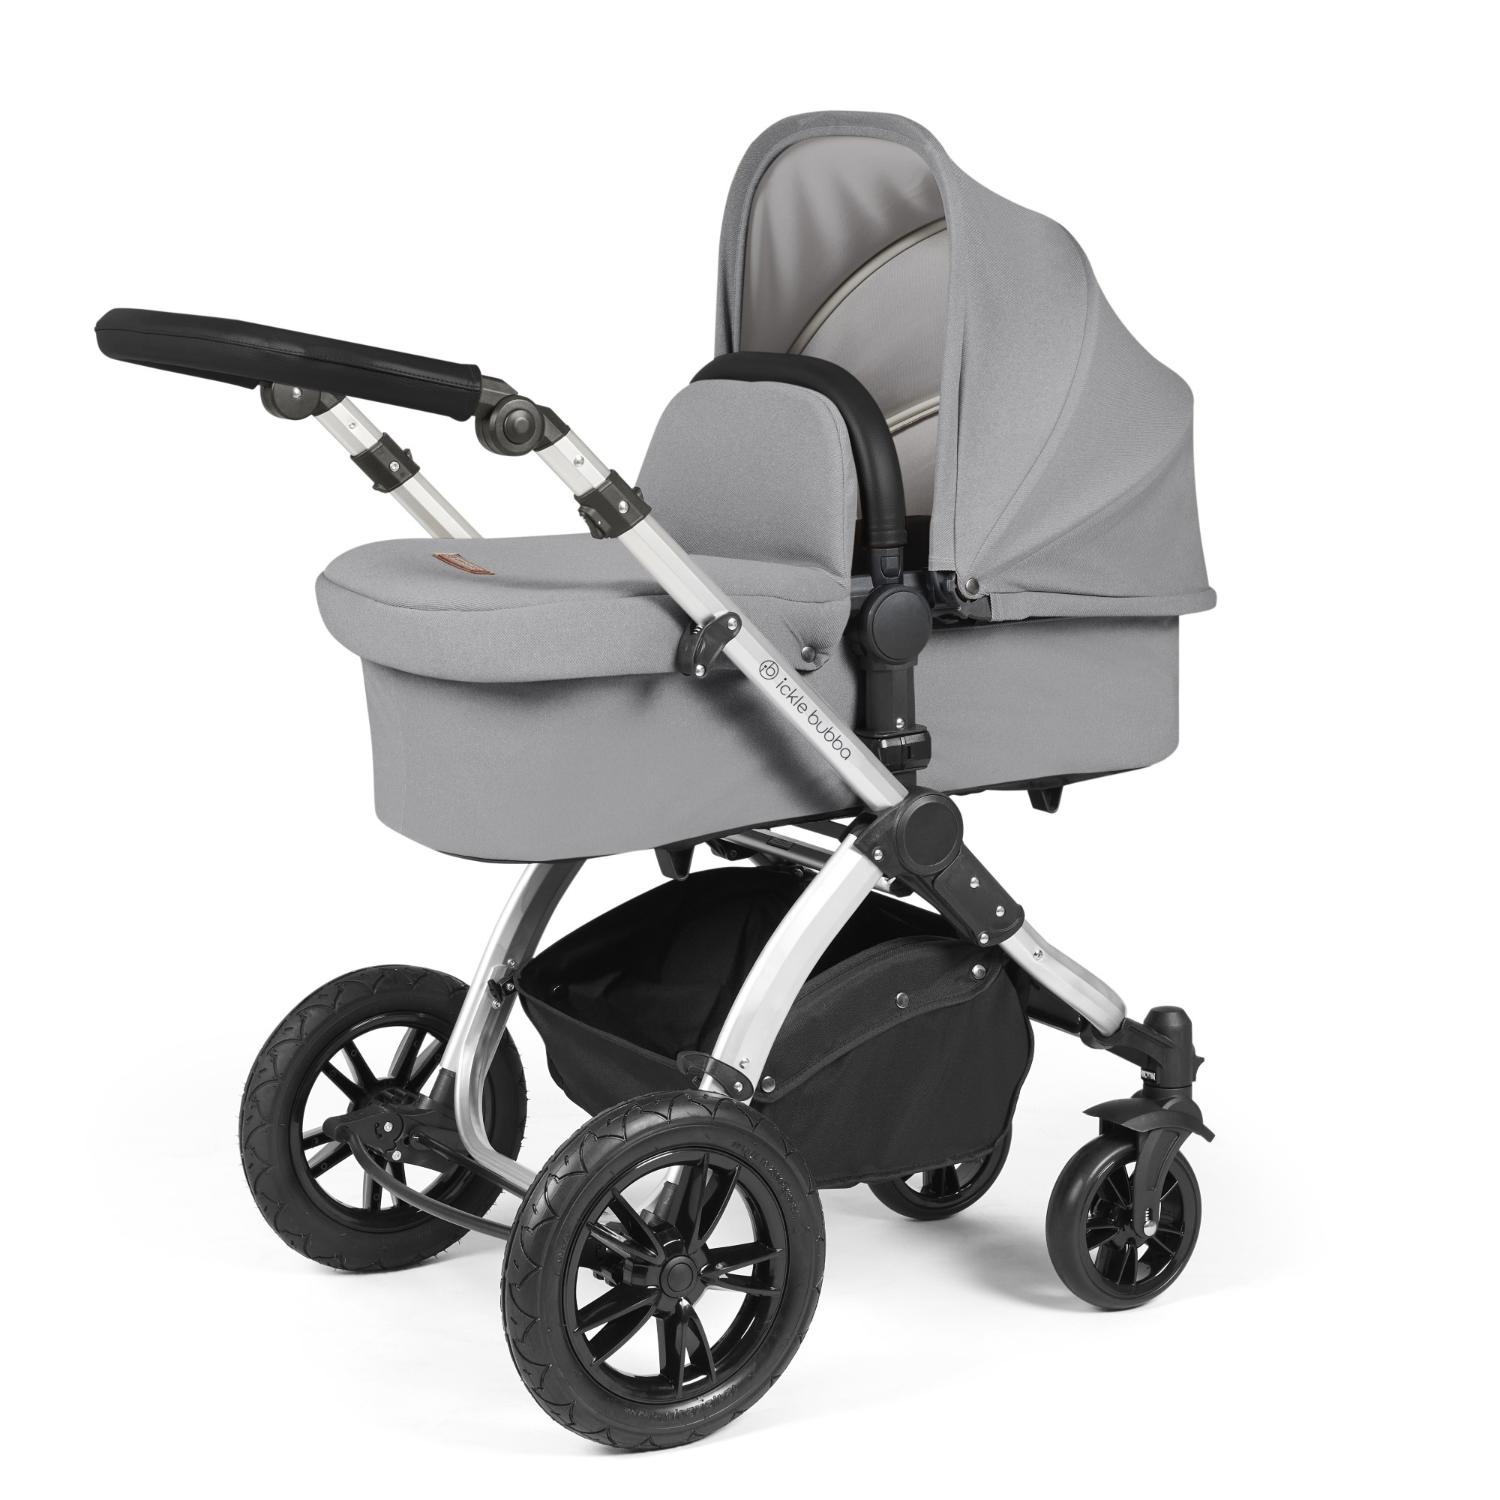 Ickle Bubba Stomp Luxe Pushchair with carrycot attached in Pearl Grey colour with silver chassis